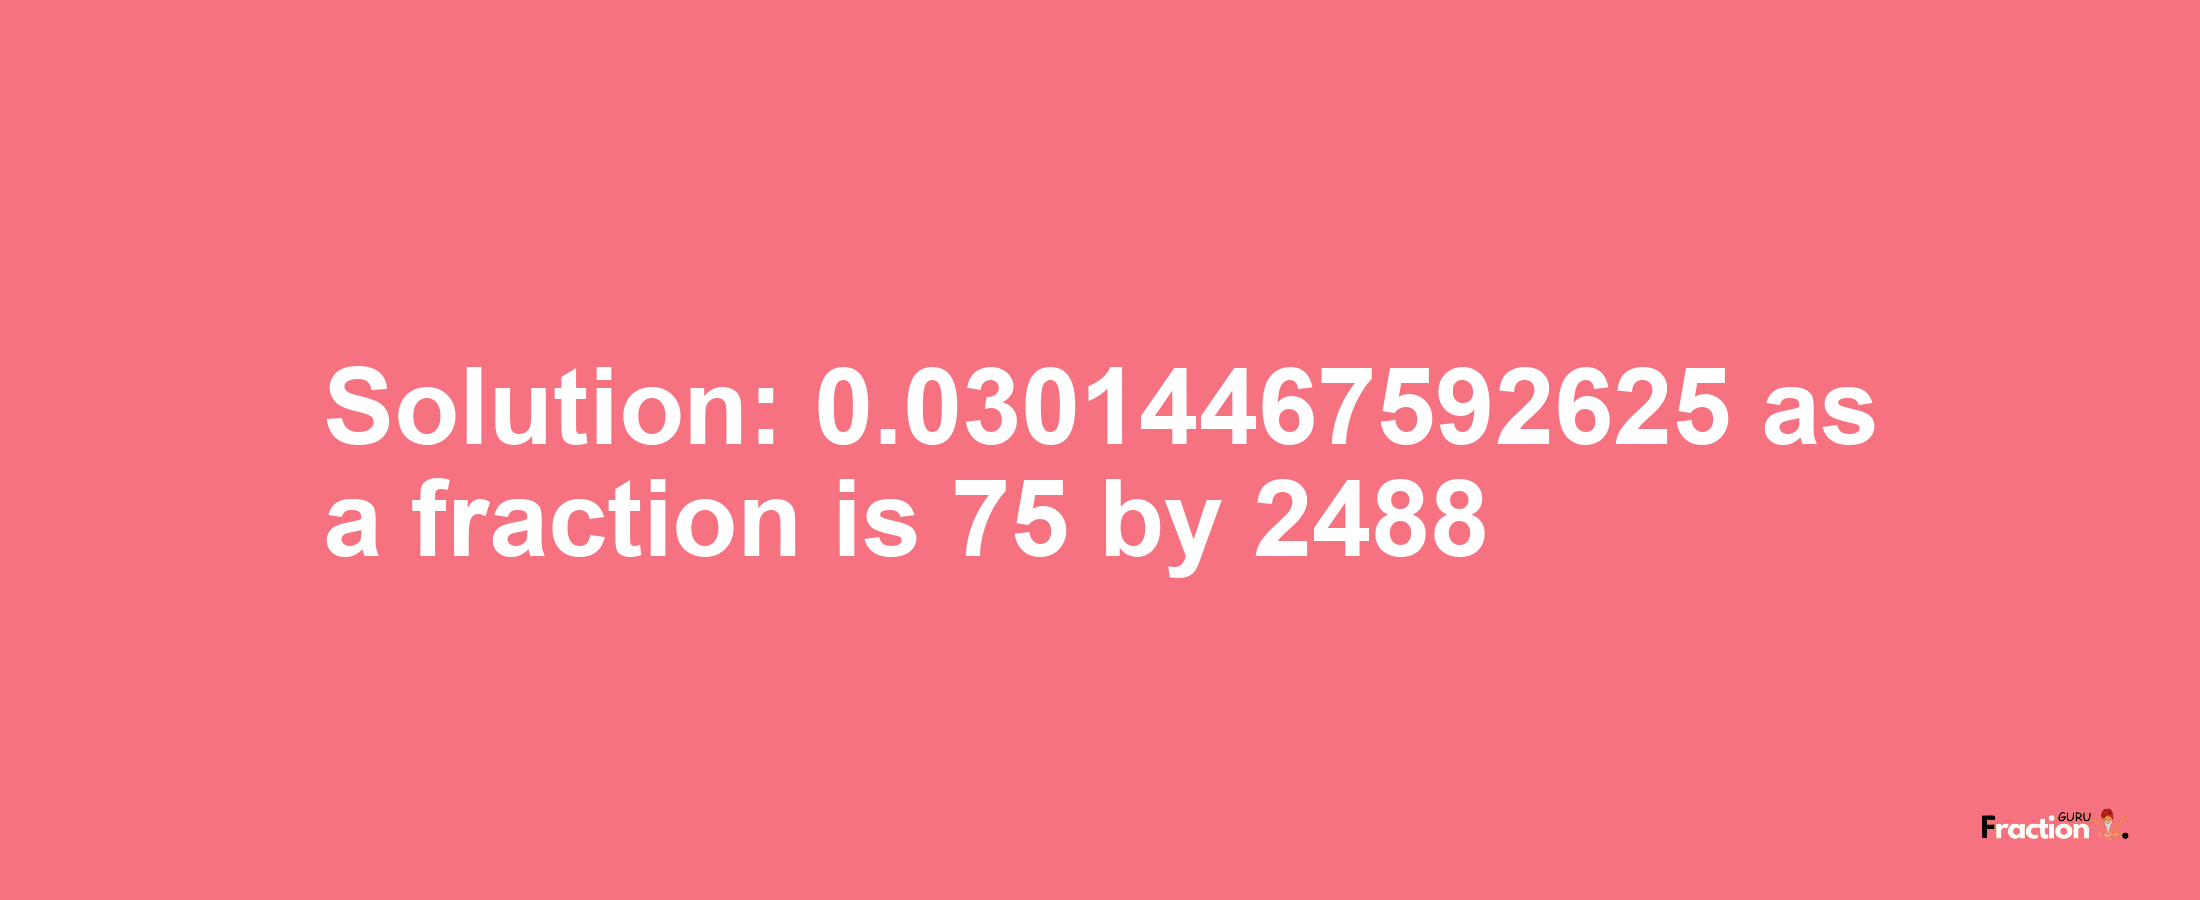 Solution:0.03014467592625 as a fraction is 75/2488